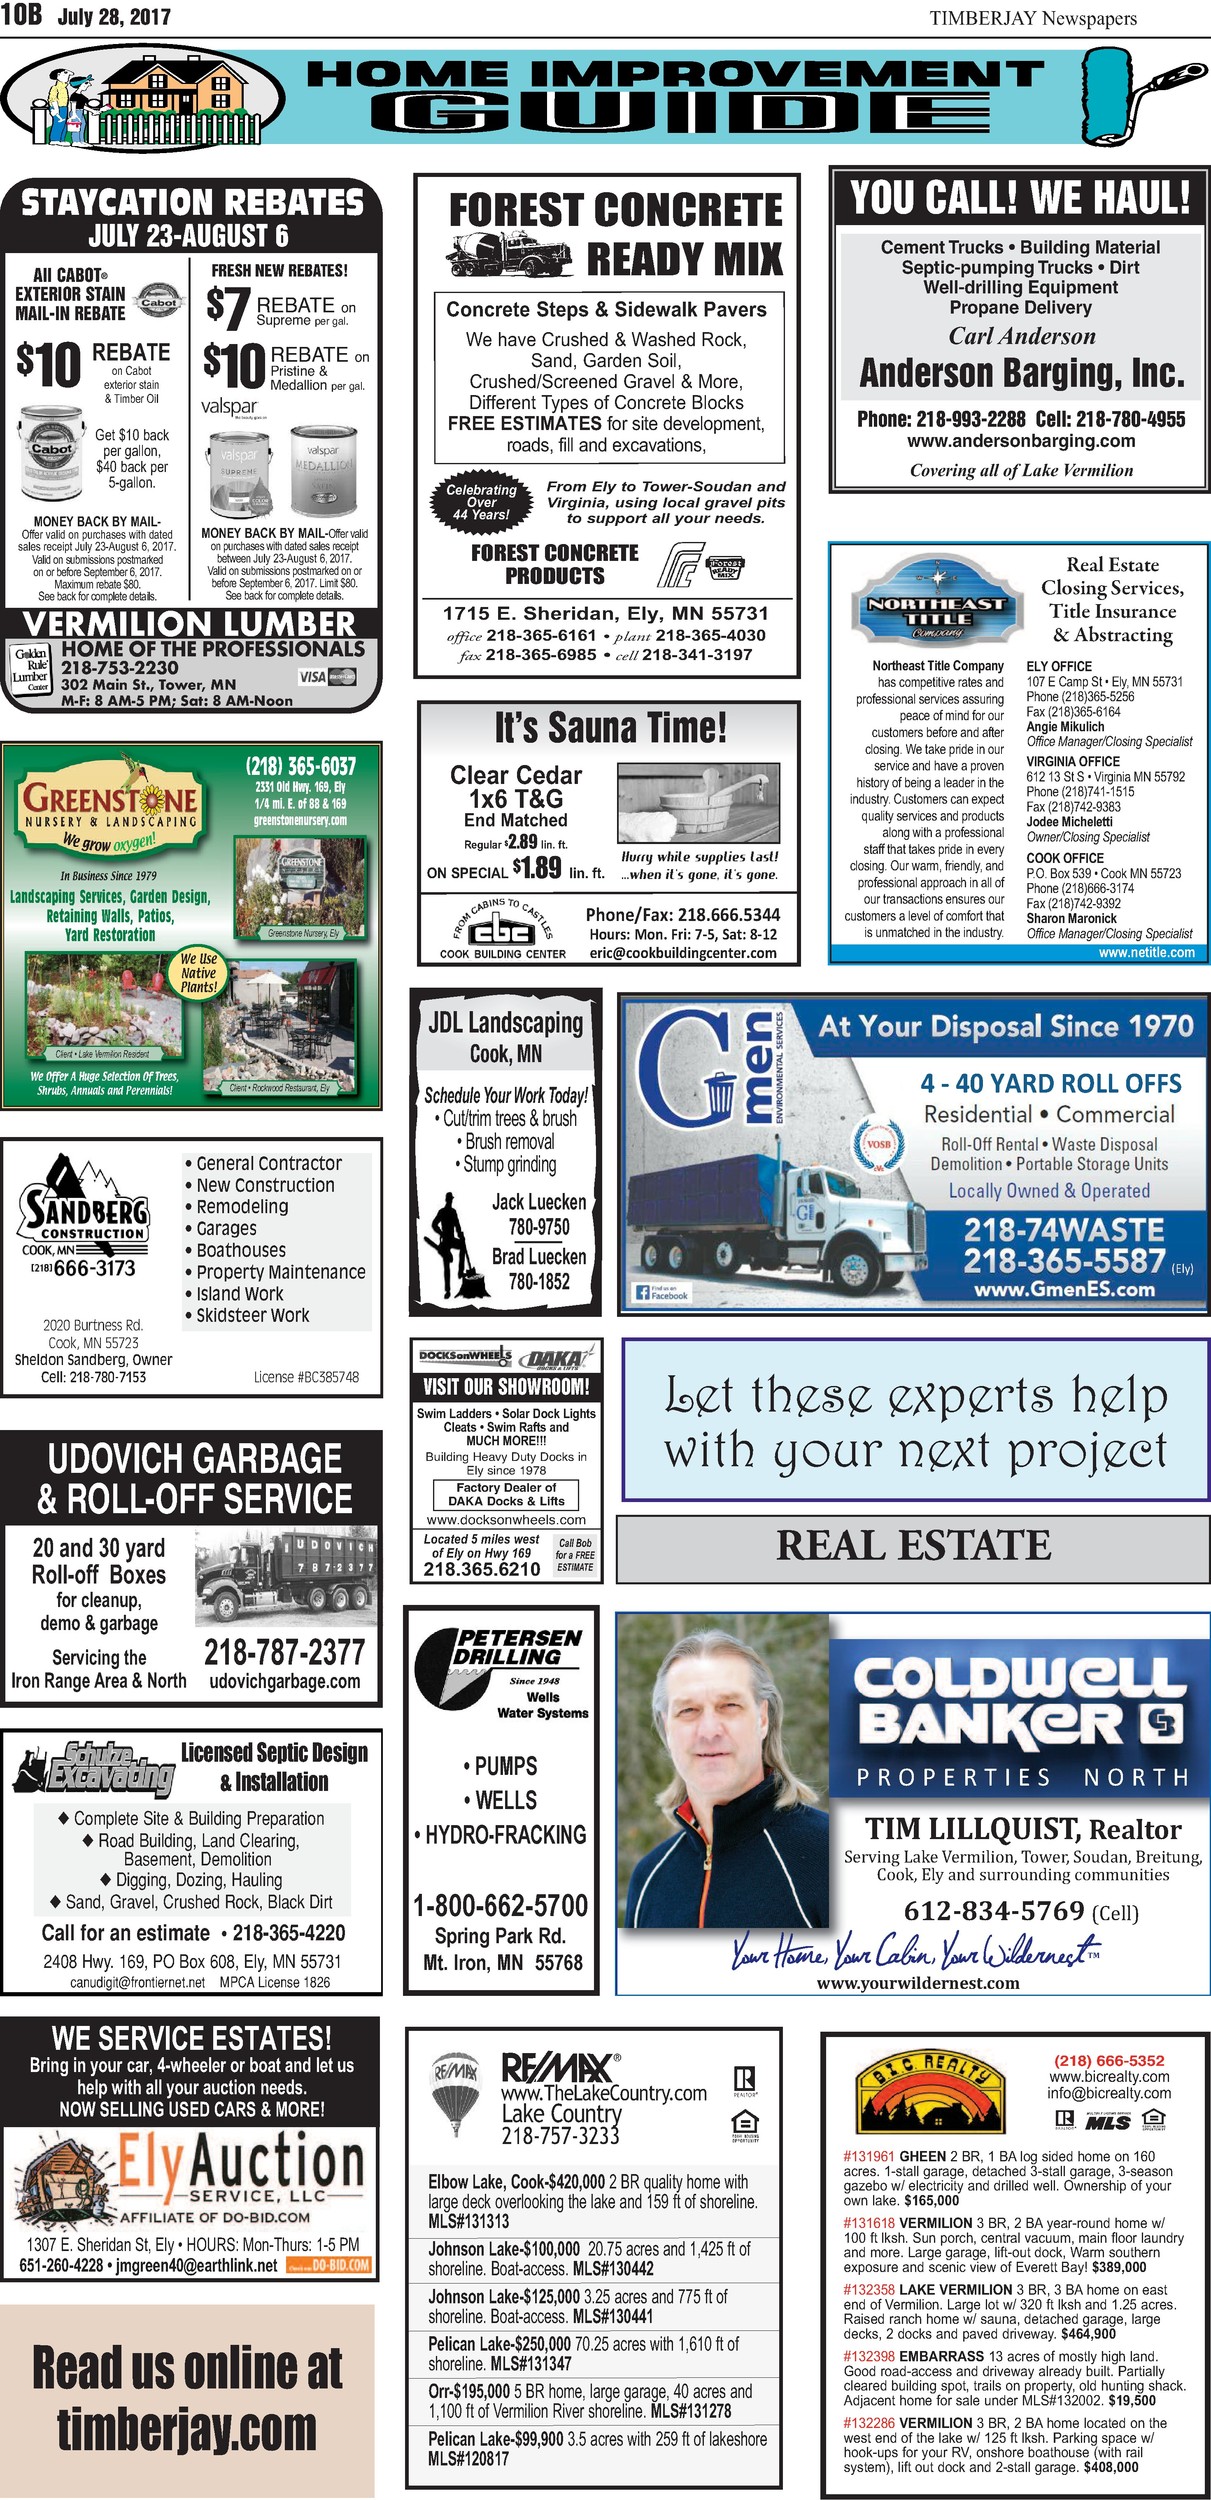 Click here for the legal notices and classifieds on page 10B